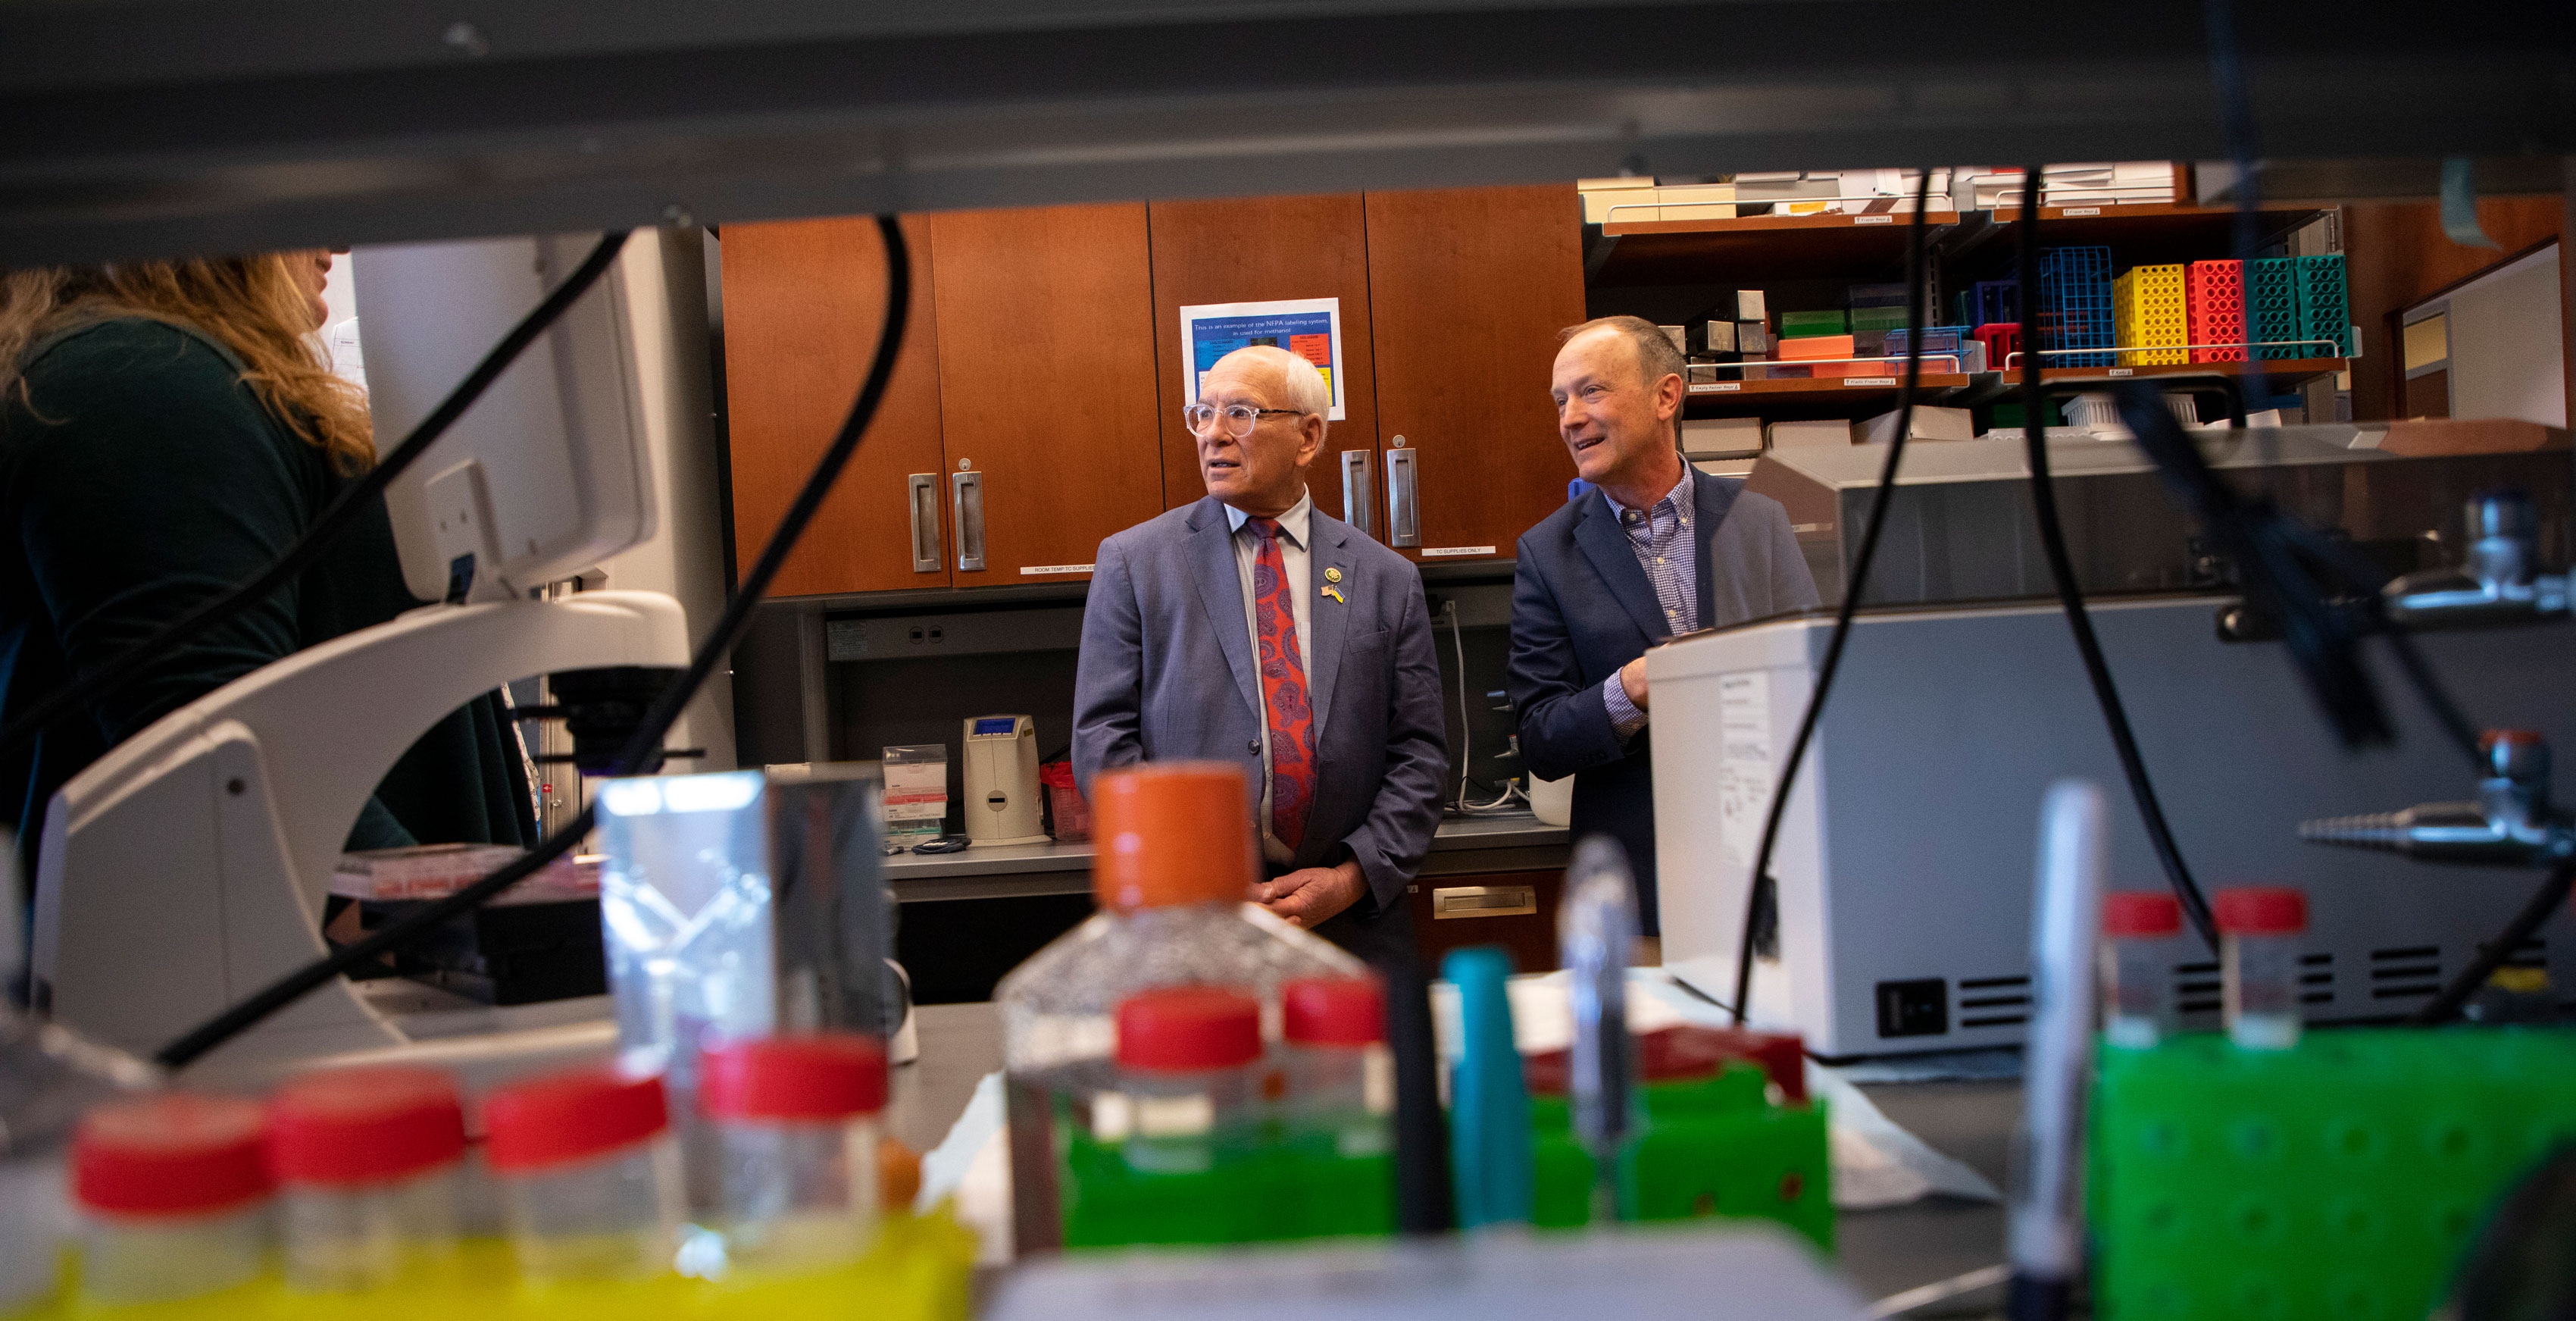 Representative Paul D. Tonko stands inside a laboratory with a UAlbany researcher.